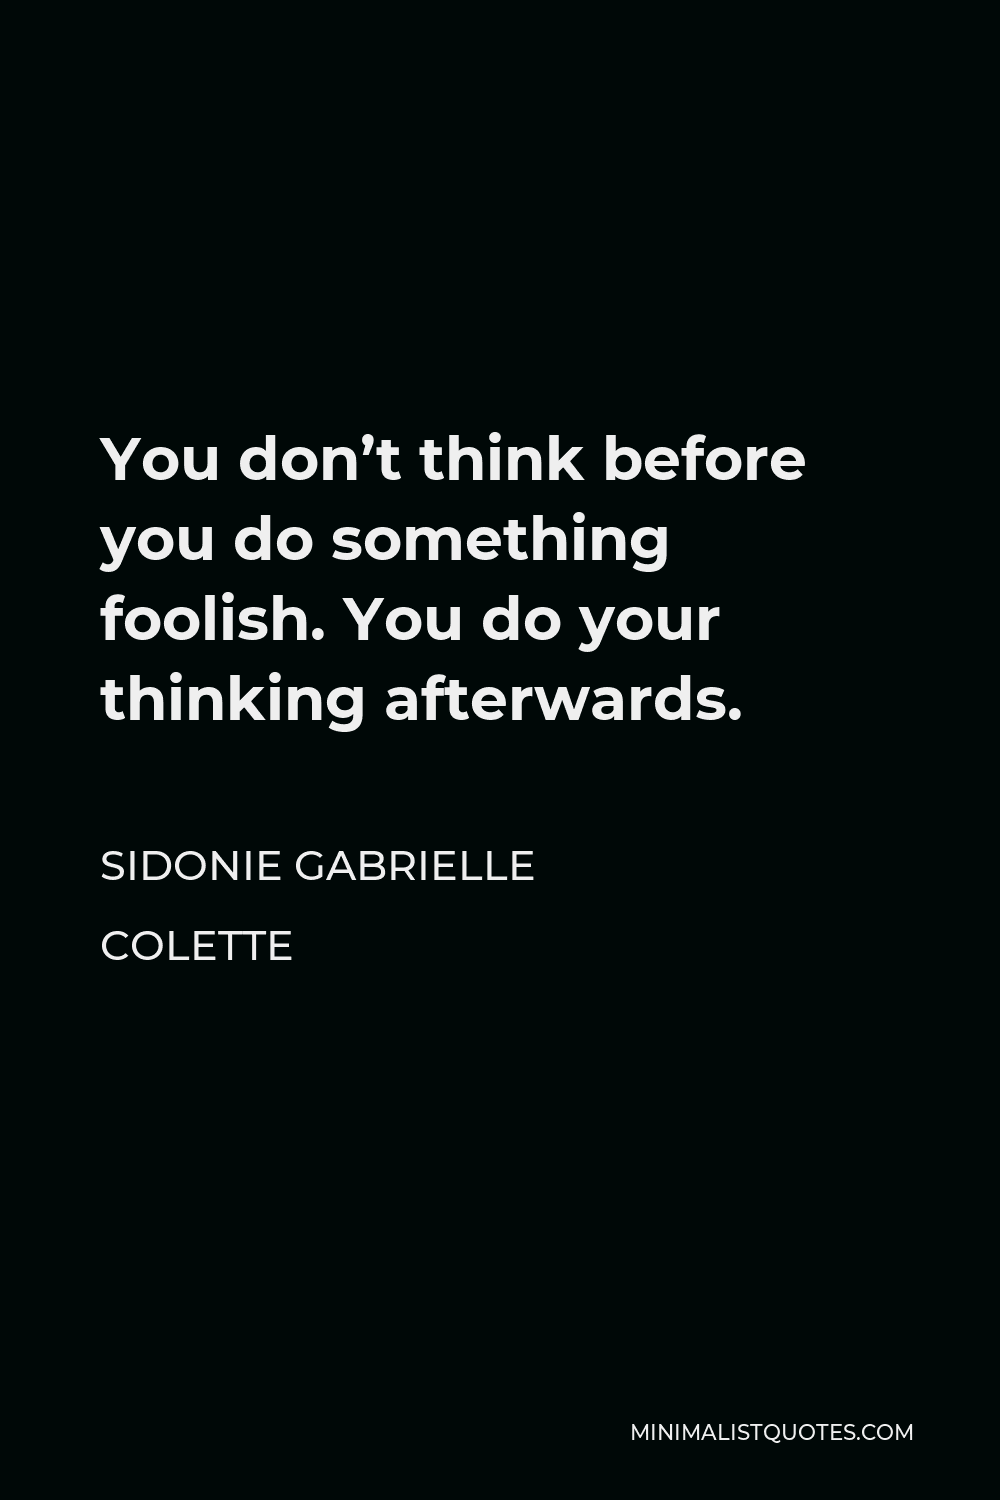 Sidonie Gabrielle Colette Quote - You don’t think before you do something foolish. You do your thinking afterwards.